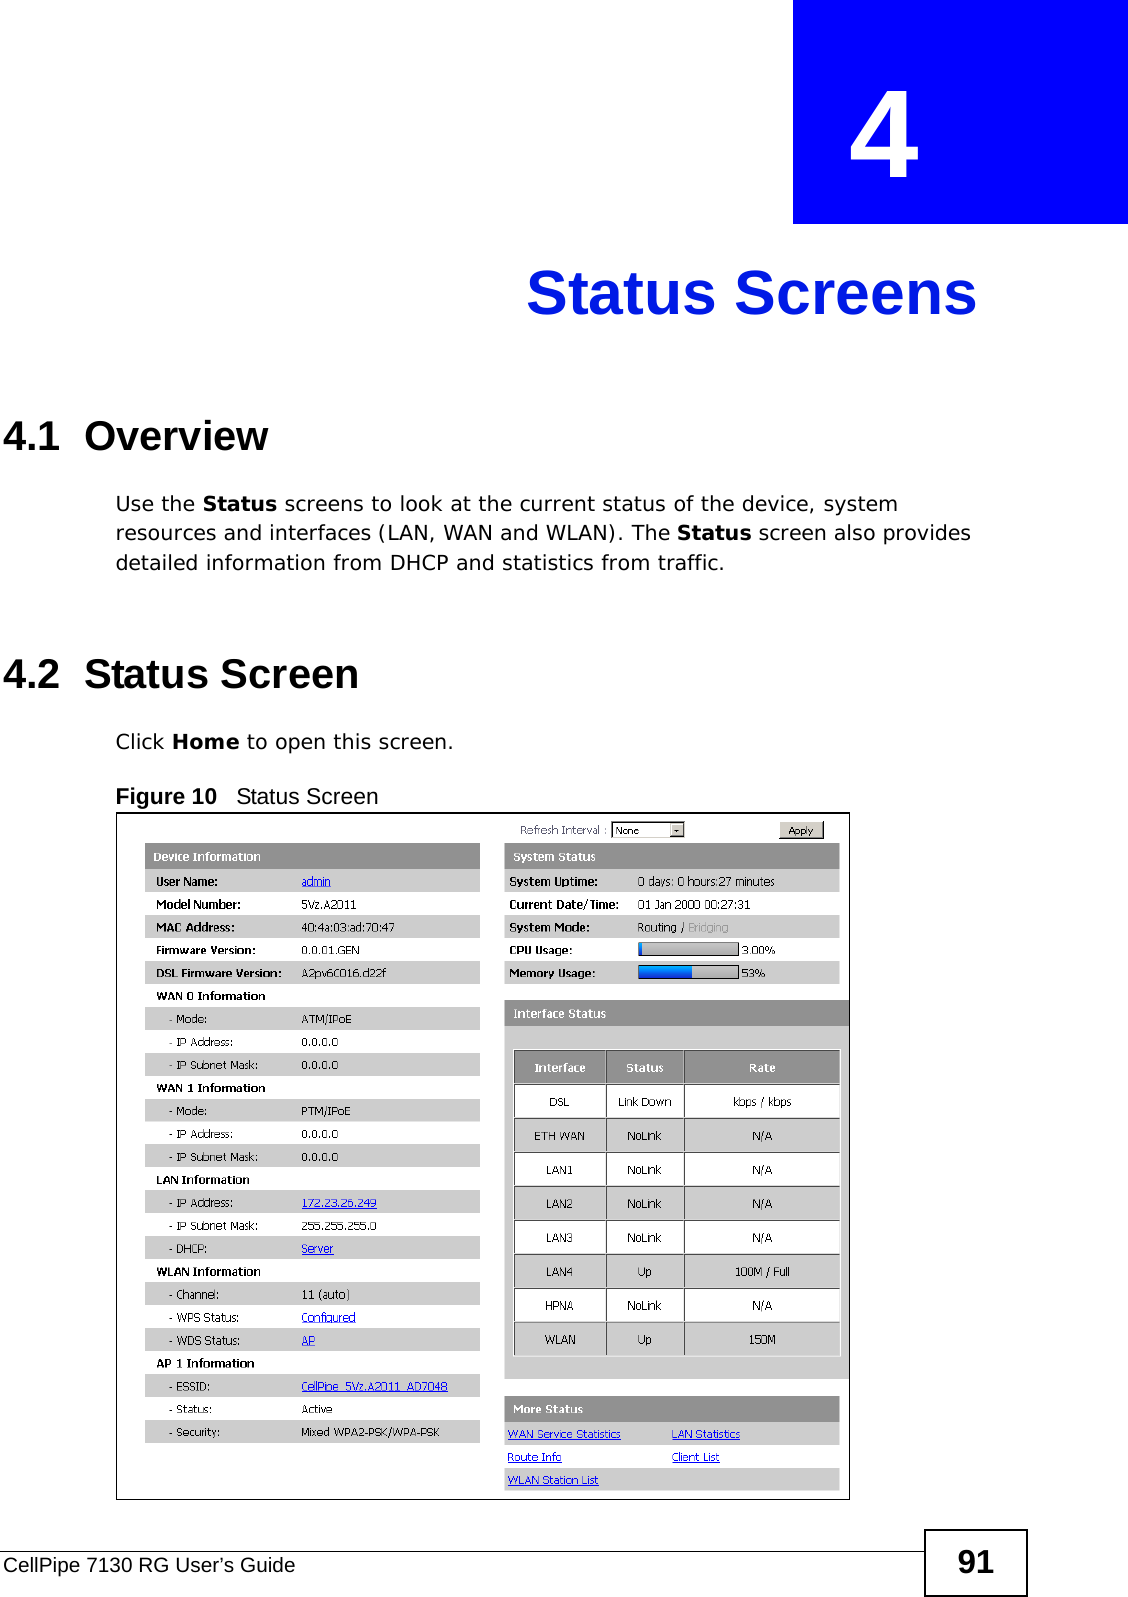 CellPipe 7130 RG User’s Guide 91CHAPTER  4 Status Screens4.1  OverviewUse the Status screens to look at the current status of the device, system resources and interfaces (LAN, WAN and WLAN). The Status screen also provides detailed information from DHCP and statistics from traffic.4.2  Status Screen Click Home to open this screen.Figure 10   Status Screen